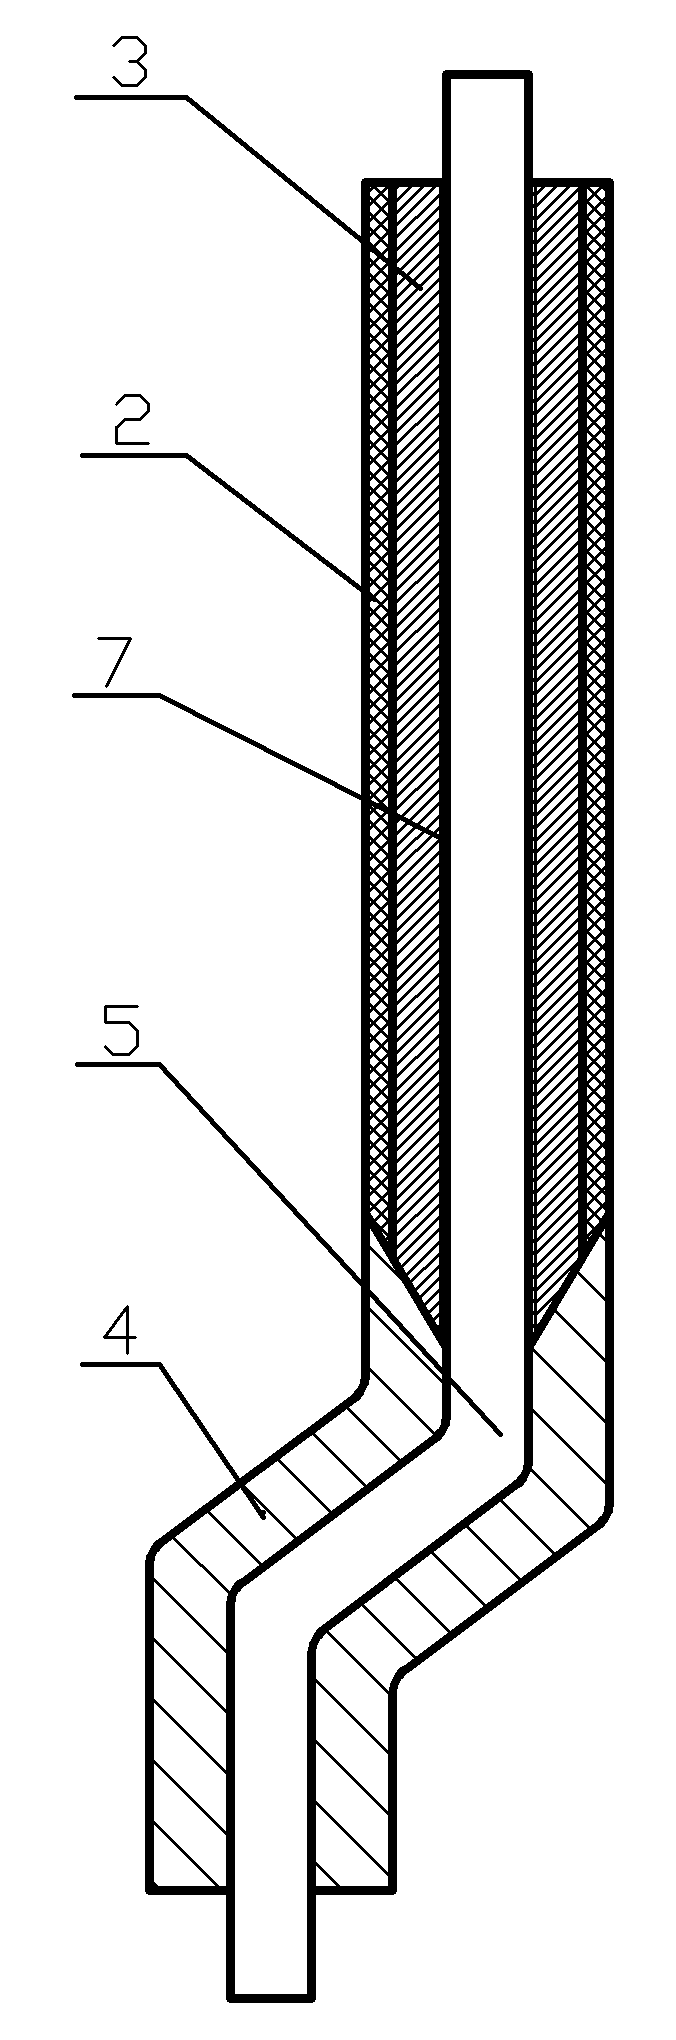 Insulating structure for rotor coil for high-voltage wound rotor motor